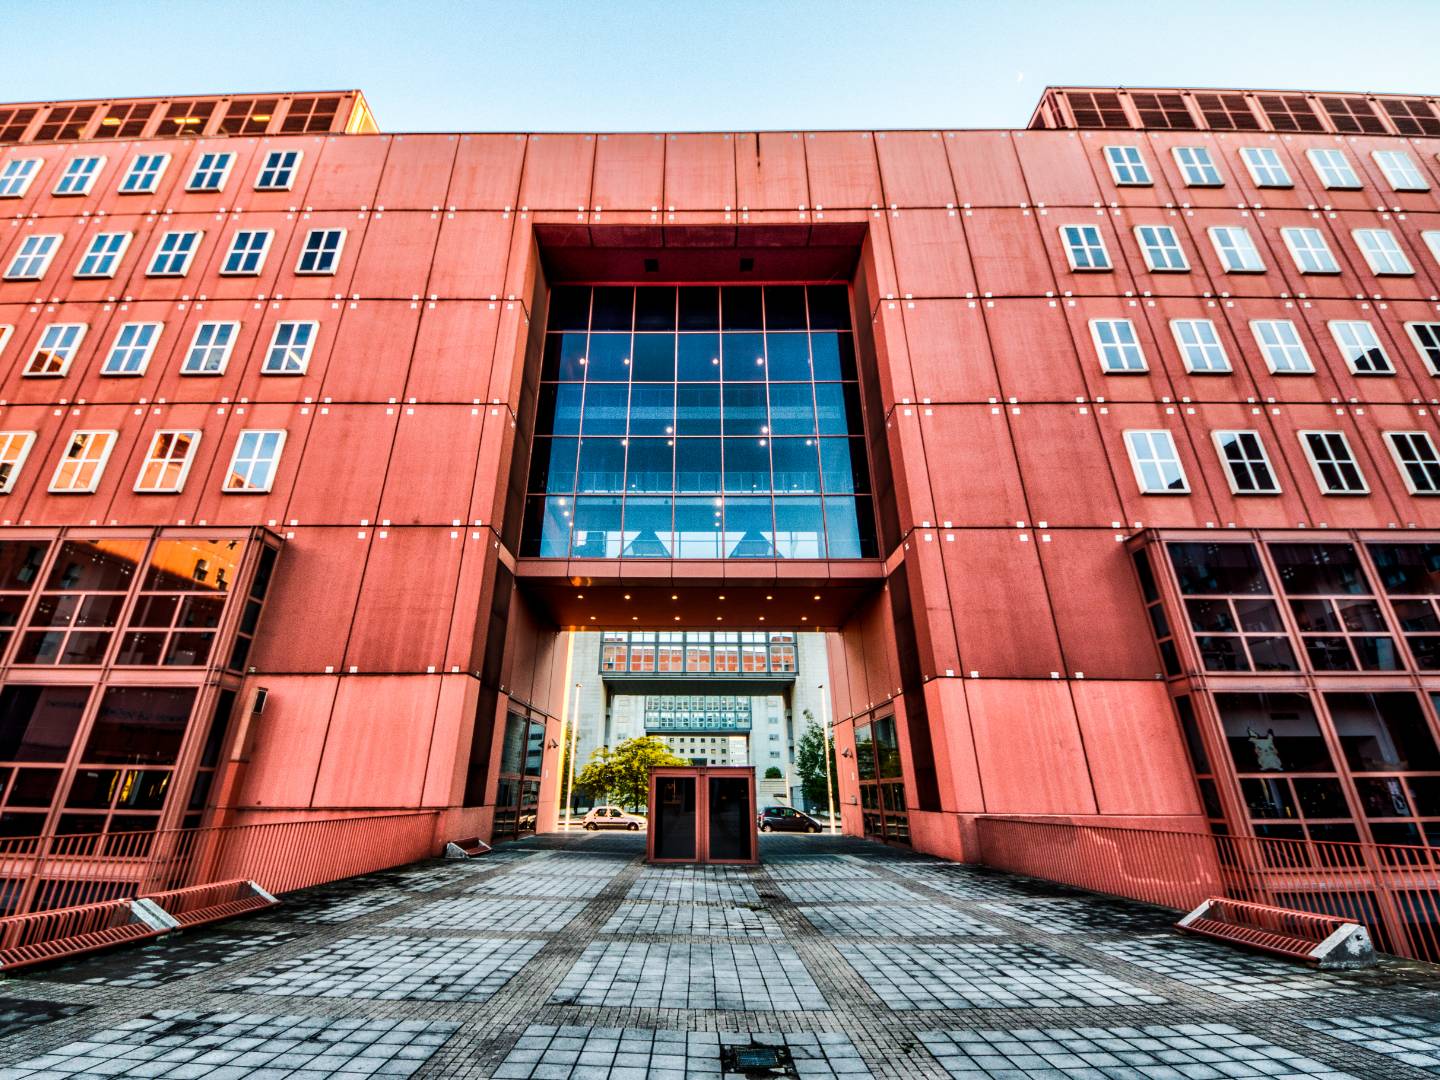 An image showing the main campus of Bicocca University in Milan